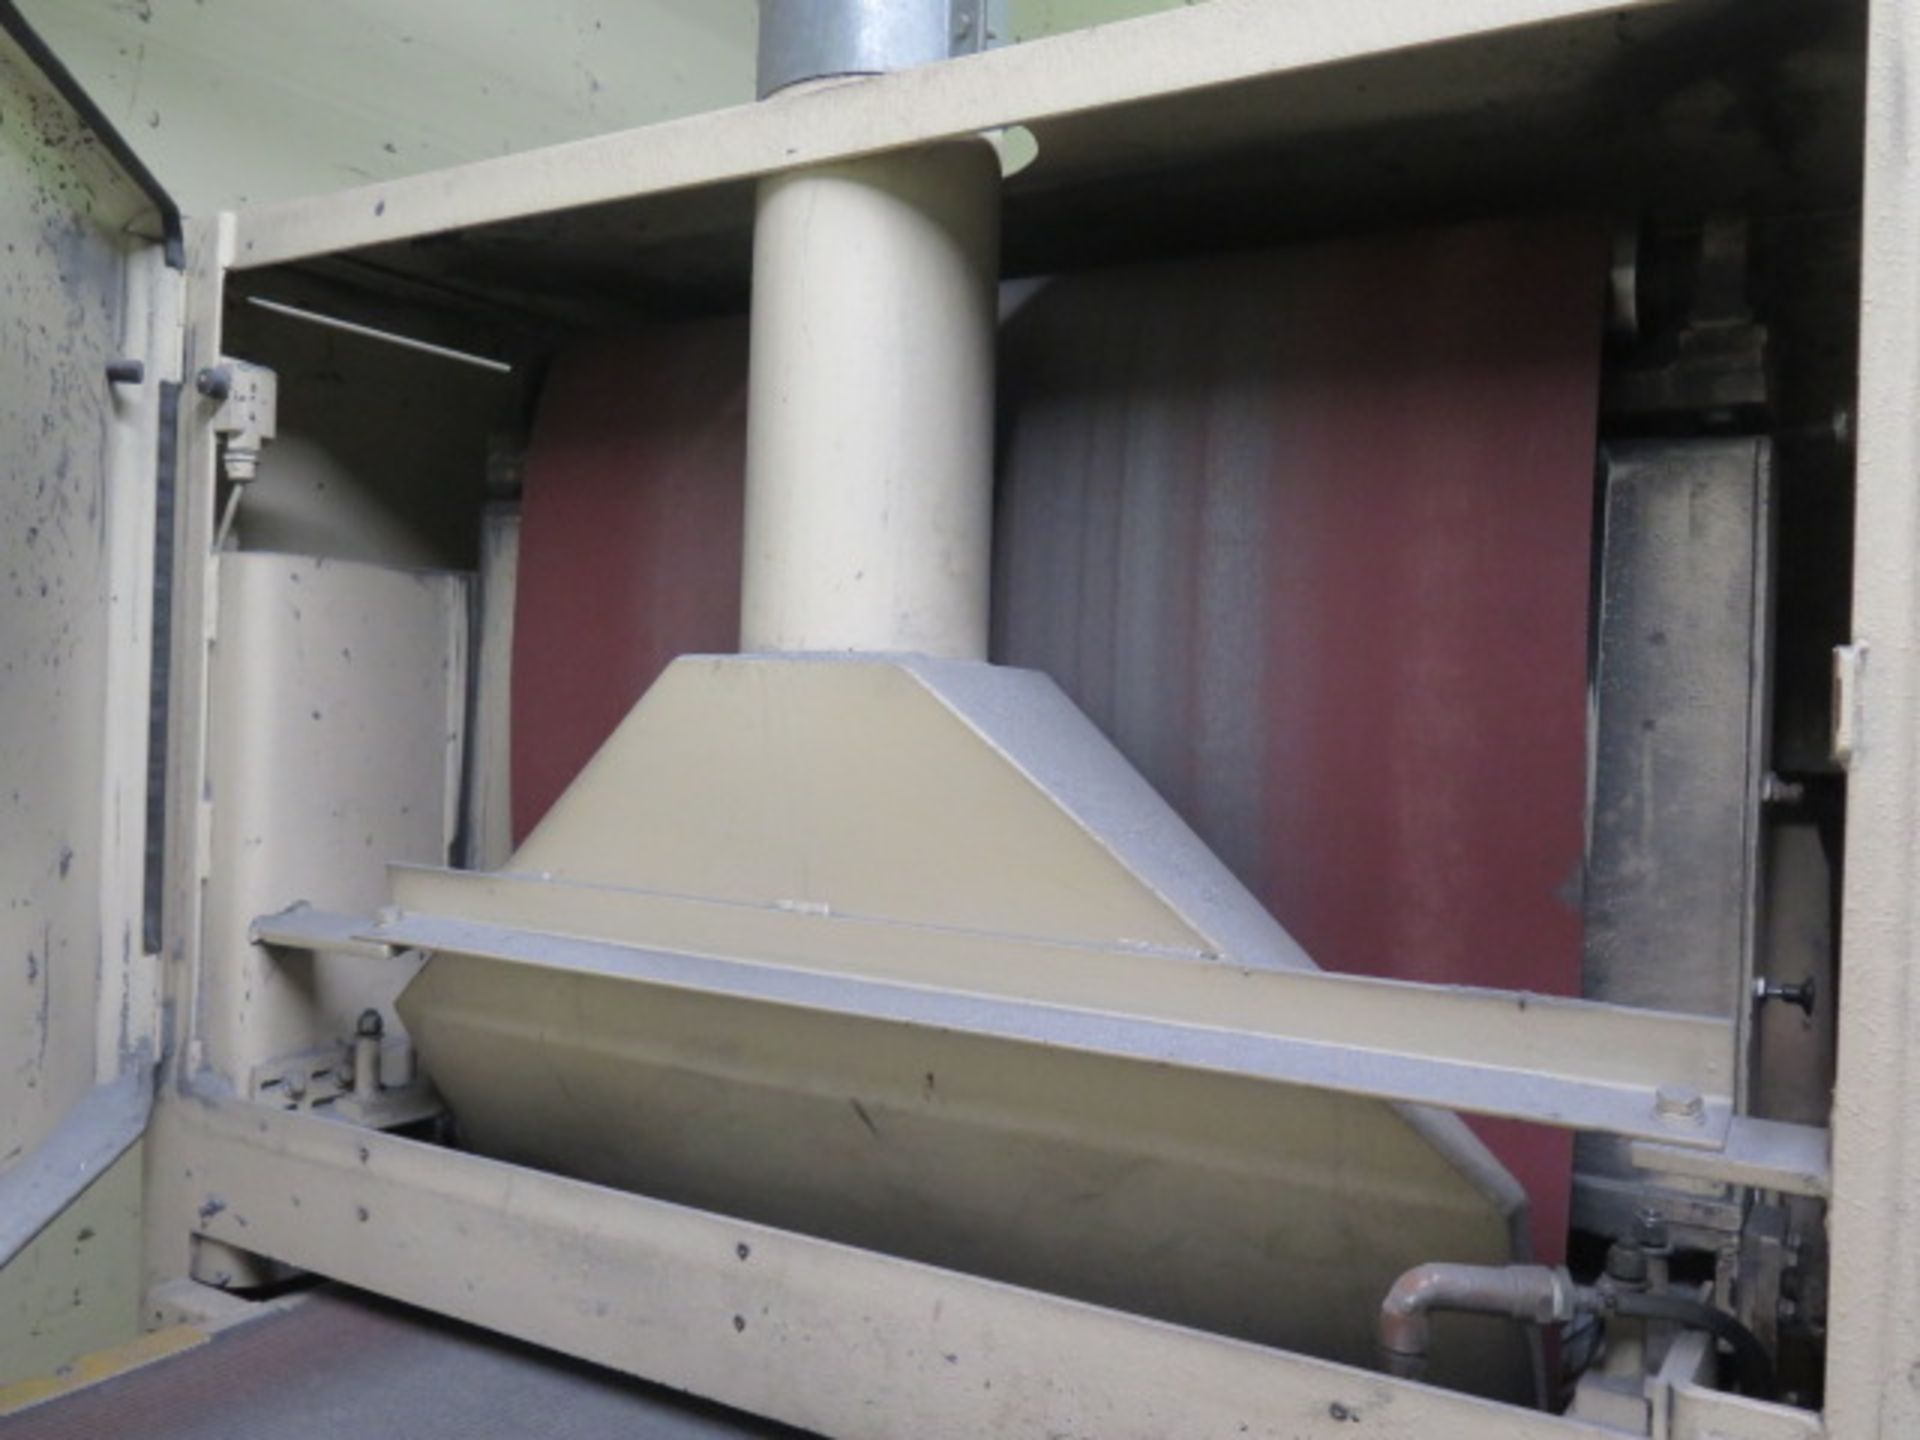 Cemco 1000 mdl. UR-1137SEMD 36" Belt Grainer s/n JR-1177-1 w/ Rand Bright dust collector, SOLD AS IS - Image 5 of 18